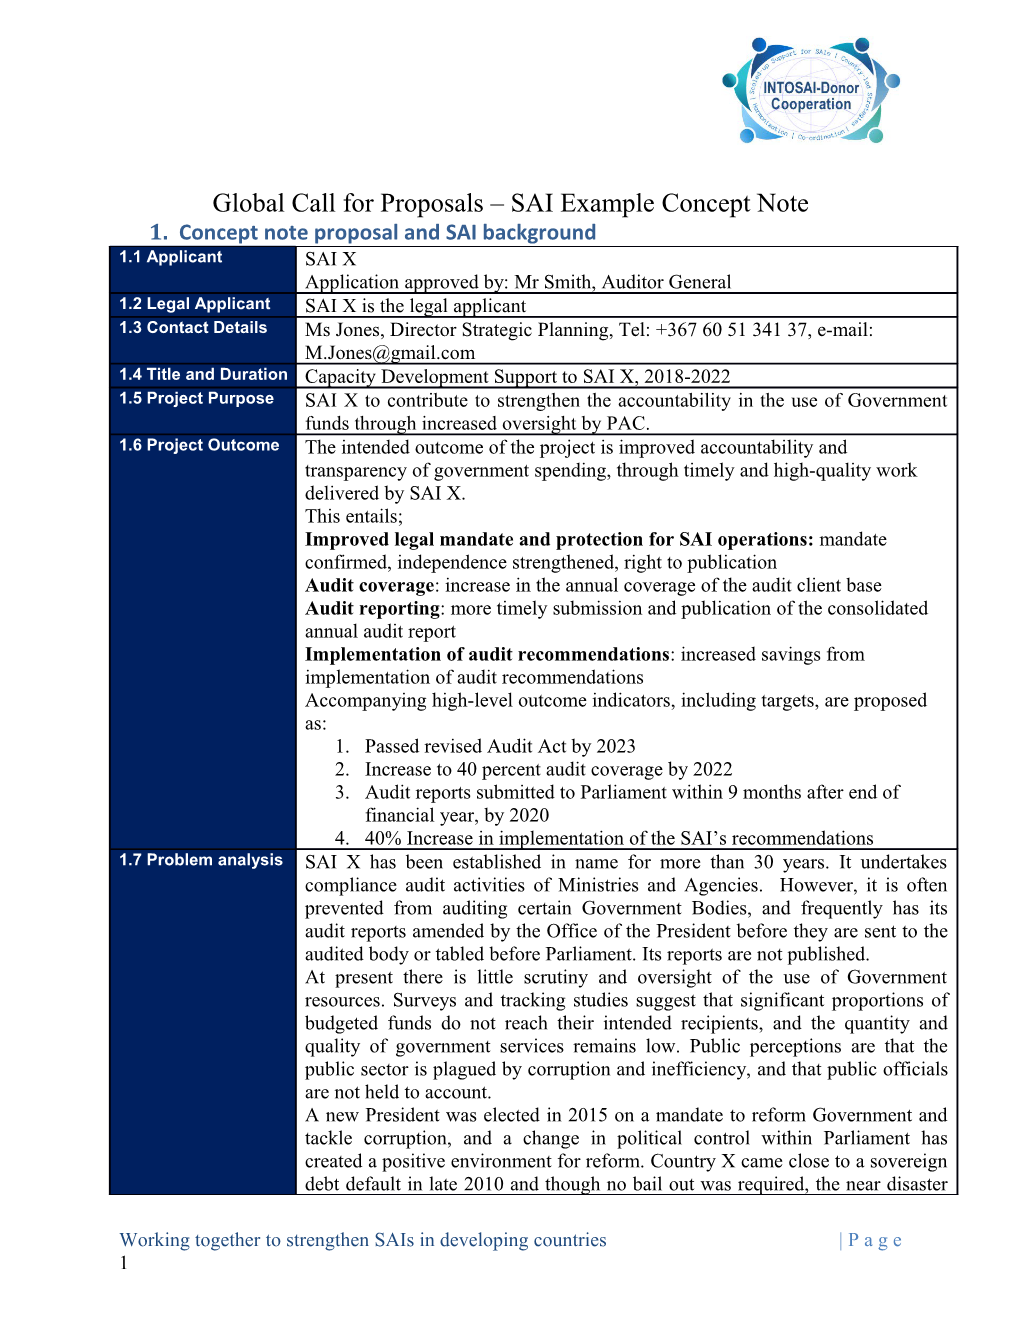 Global Call for Proposals SAI Example Concept Note